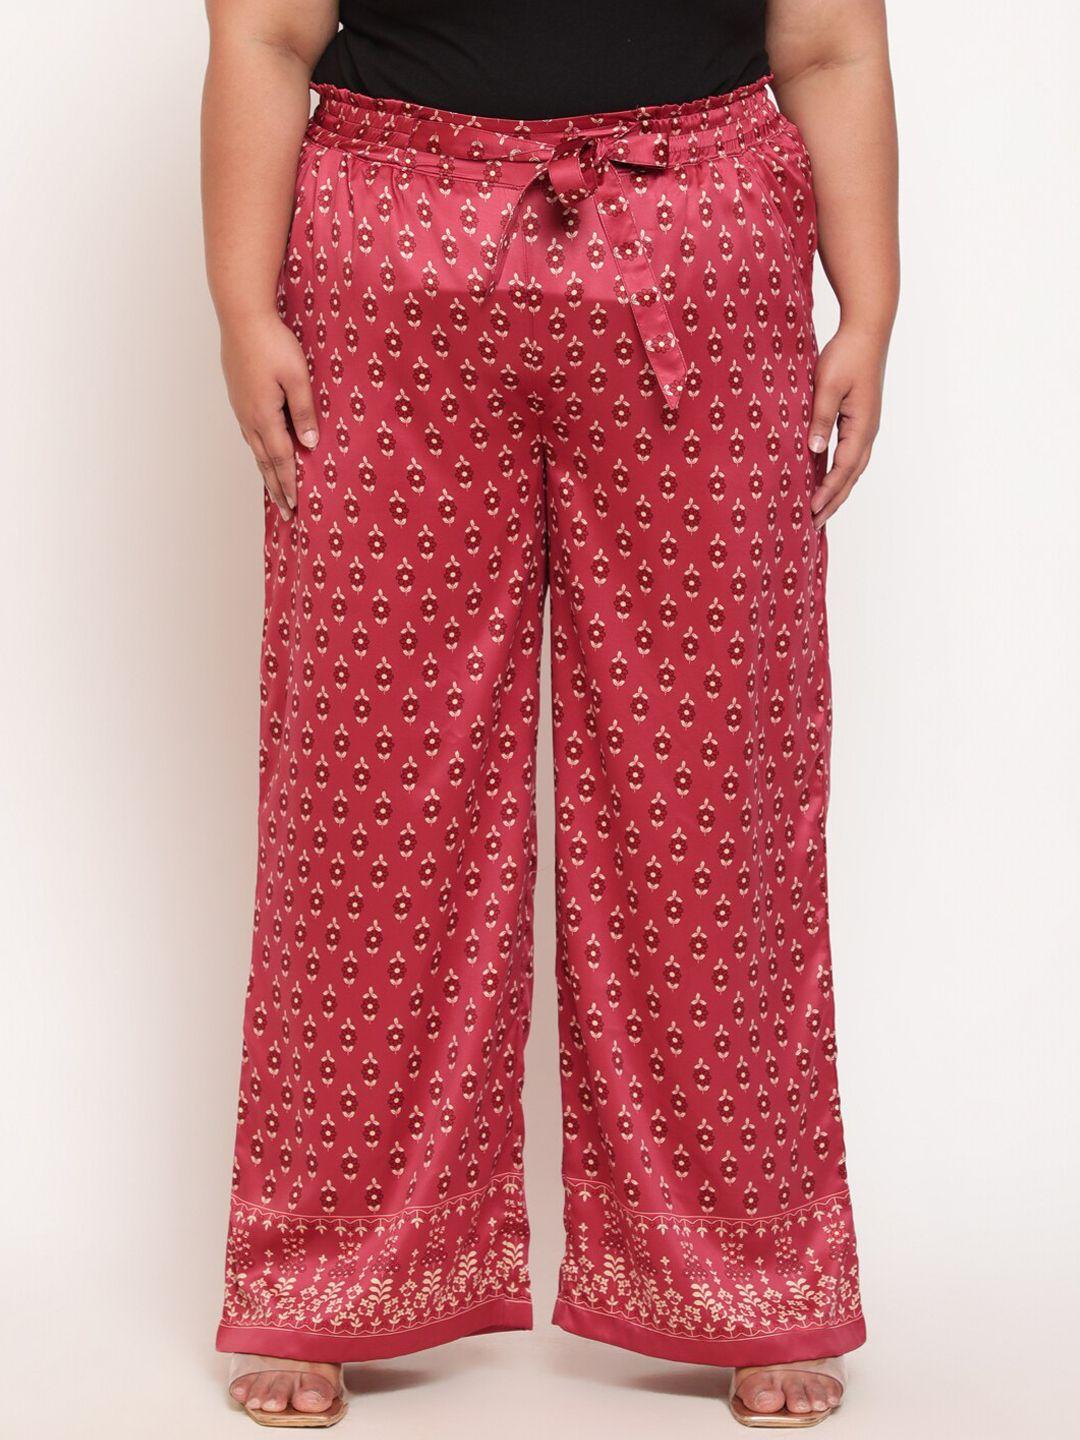 amydus women plus size red floral printed high-rise trouser